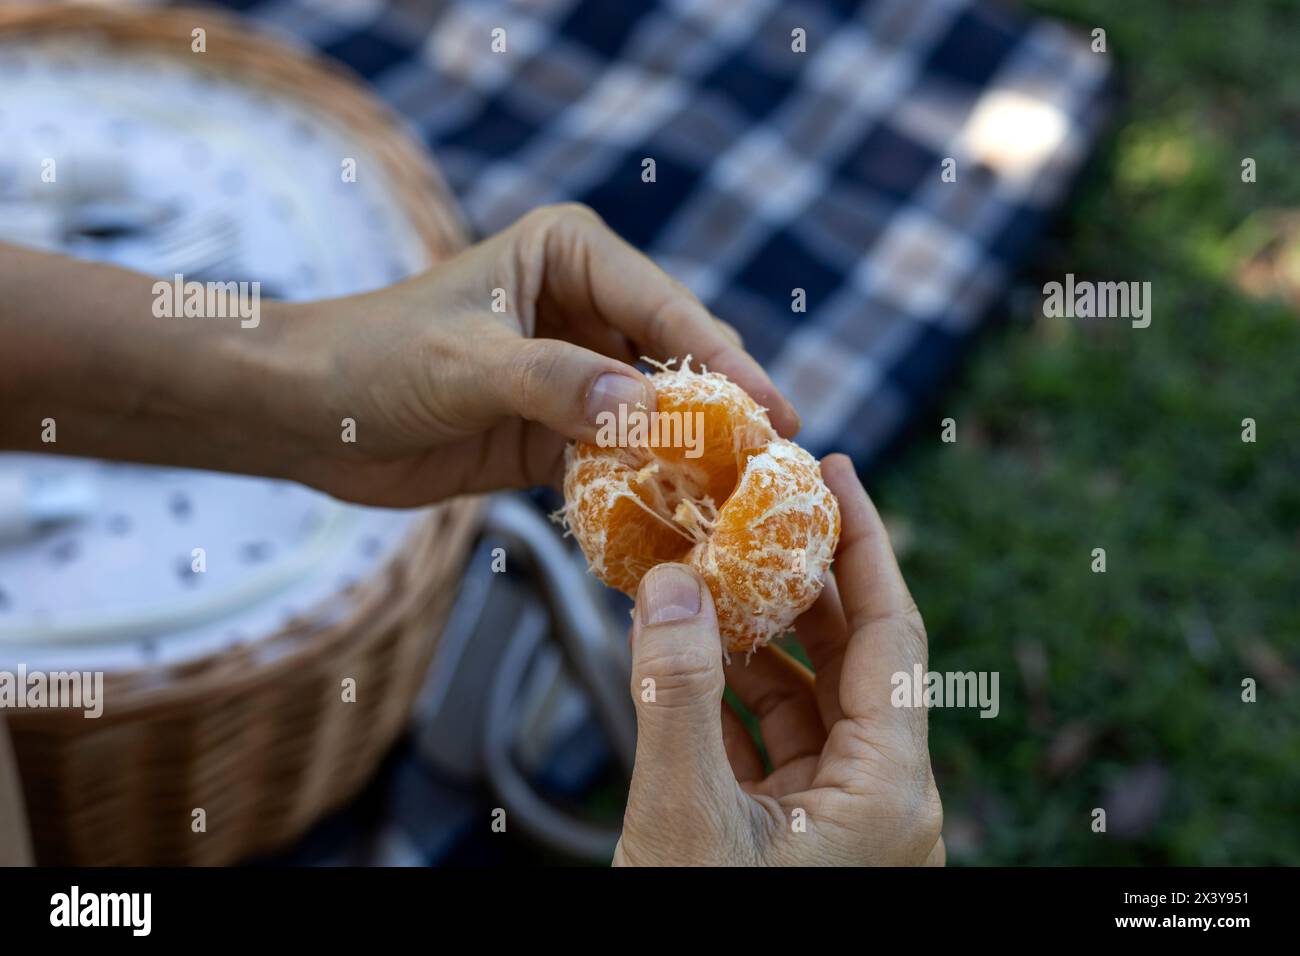 Woman sitting at picnic eating a tangerine Stock Photo